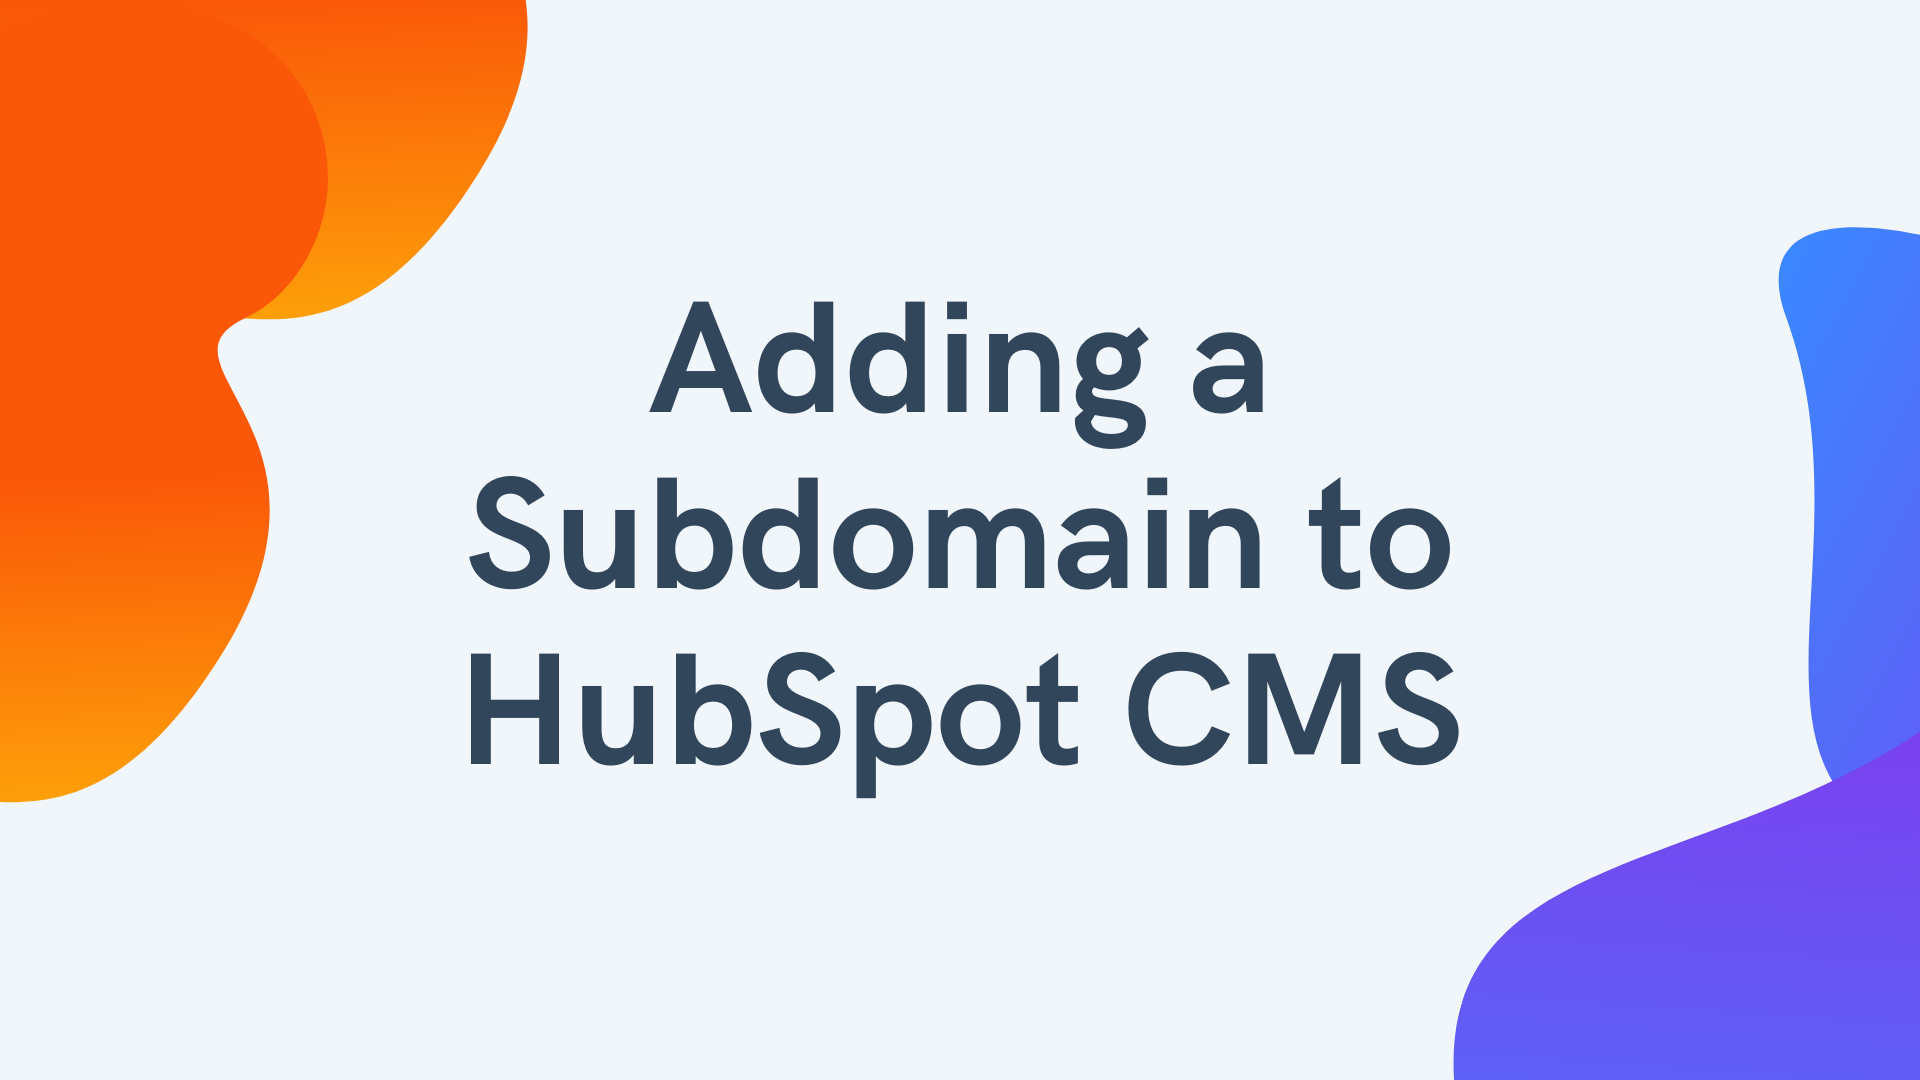 Adding a subdomain to HubSpot CMS